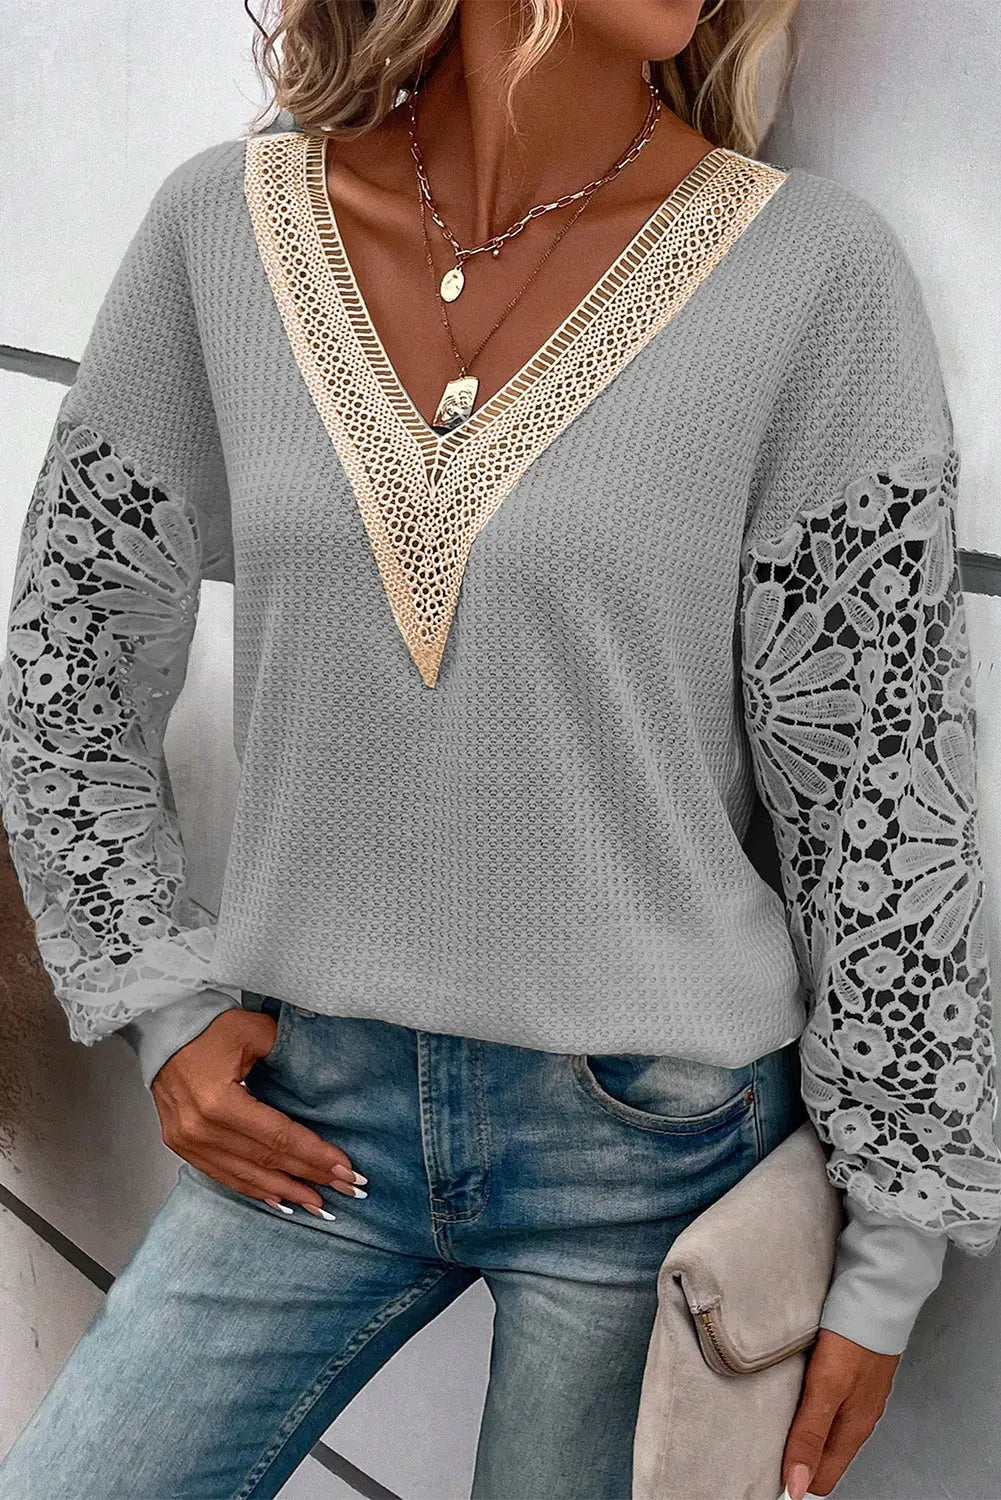 Gray lace splicing v neck puff sleeve top - long tops